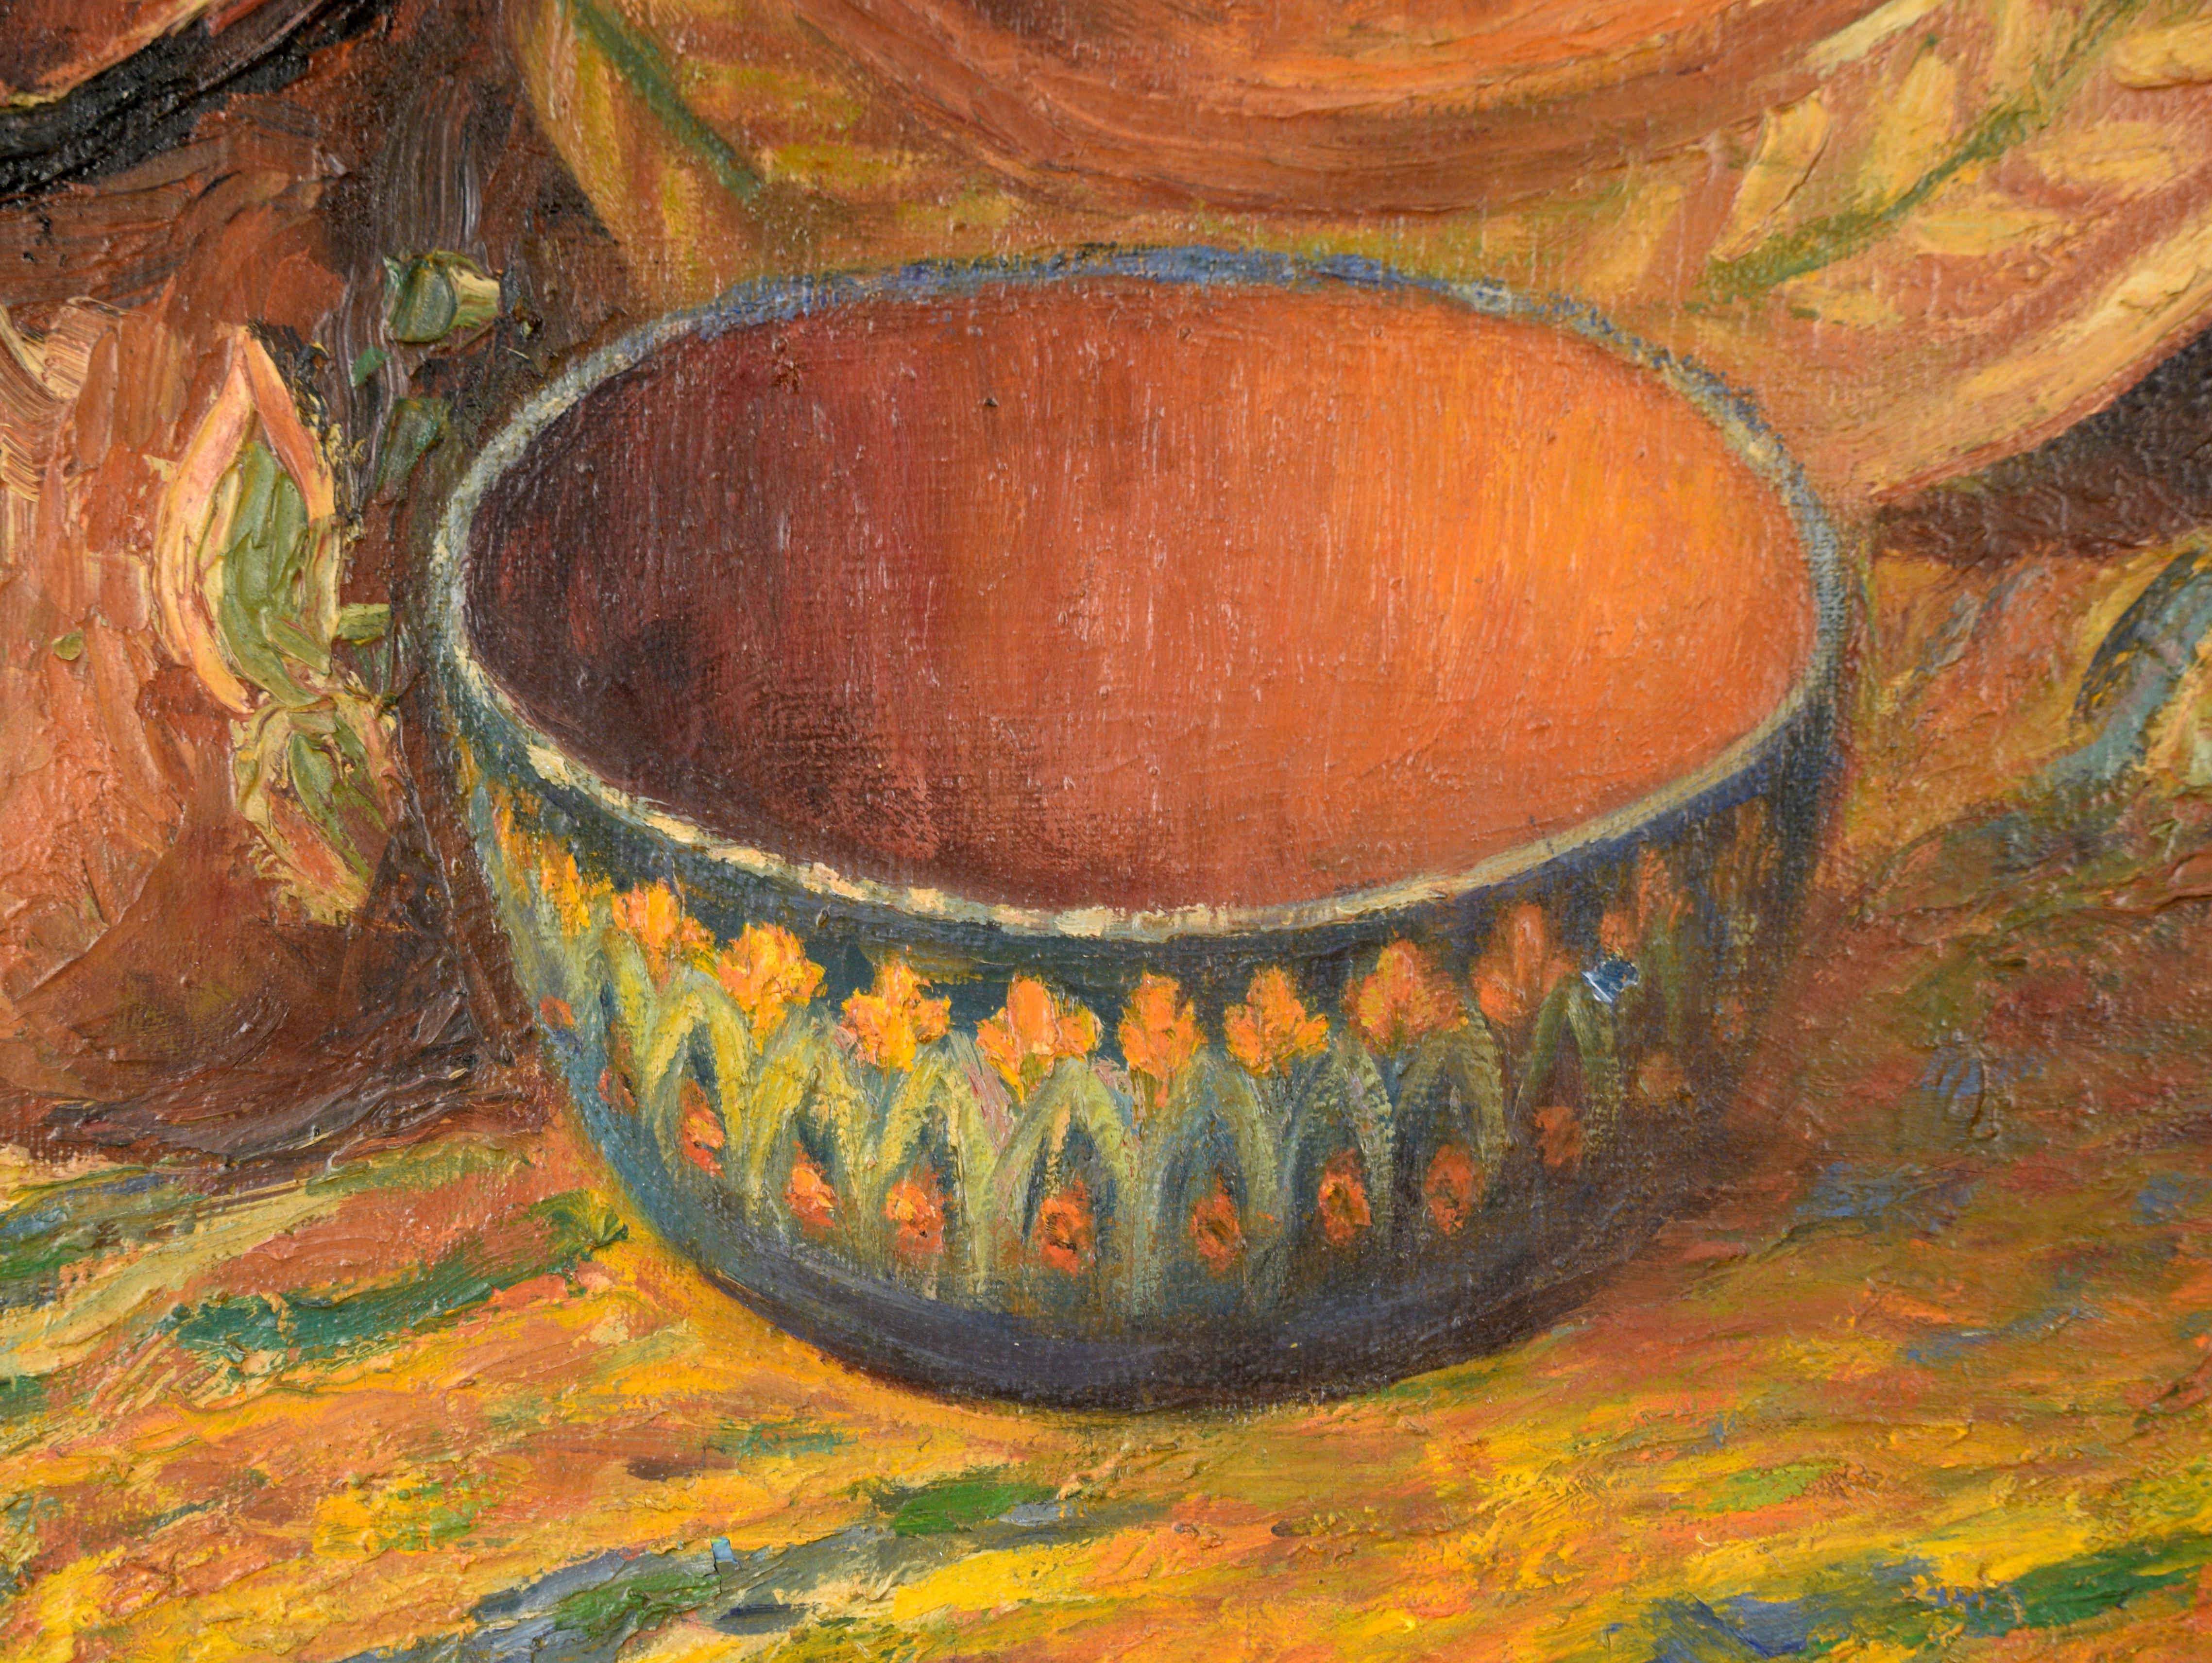 Stately still life of terra cotta pottery by A. Peterson. Five pieces of pottery sit atop a table with a tablecloth. Each piece of pottery is decorated with ornate patterns, mostly in a floral theme. The pieces are dark orange-red, with green,